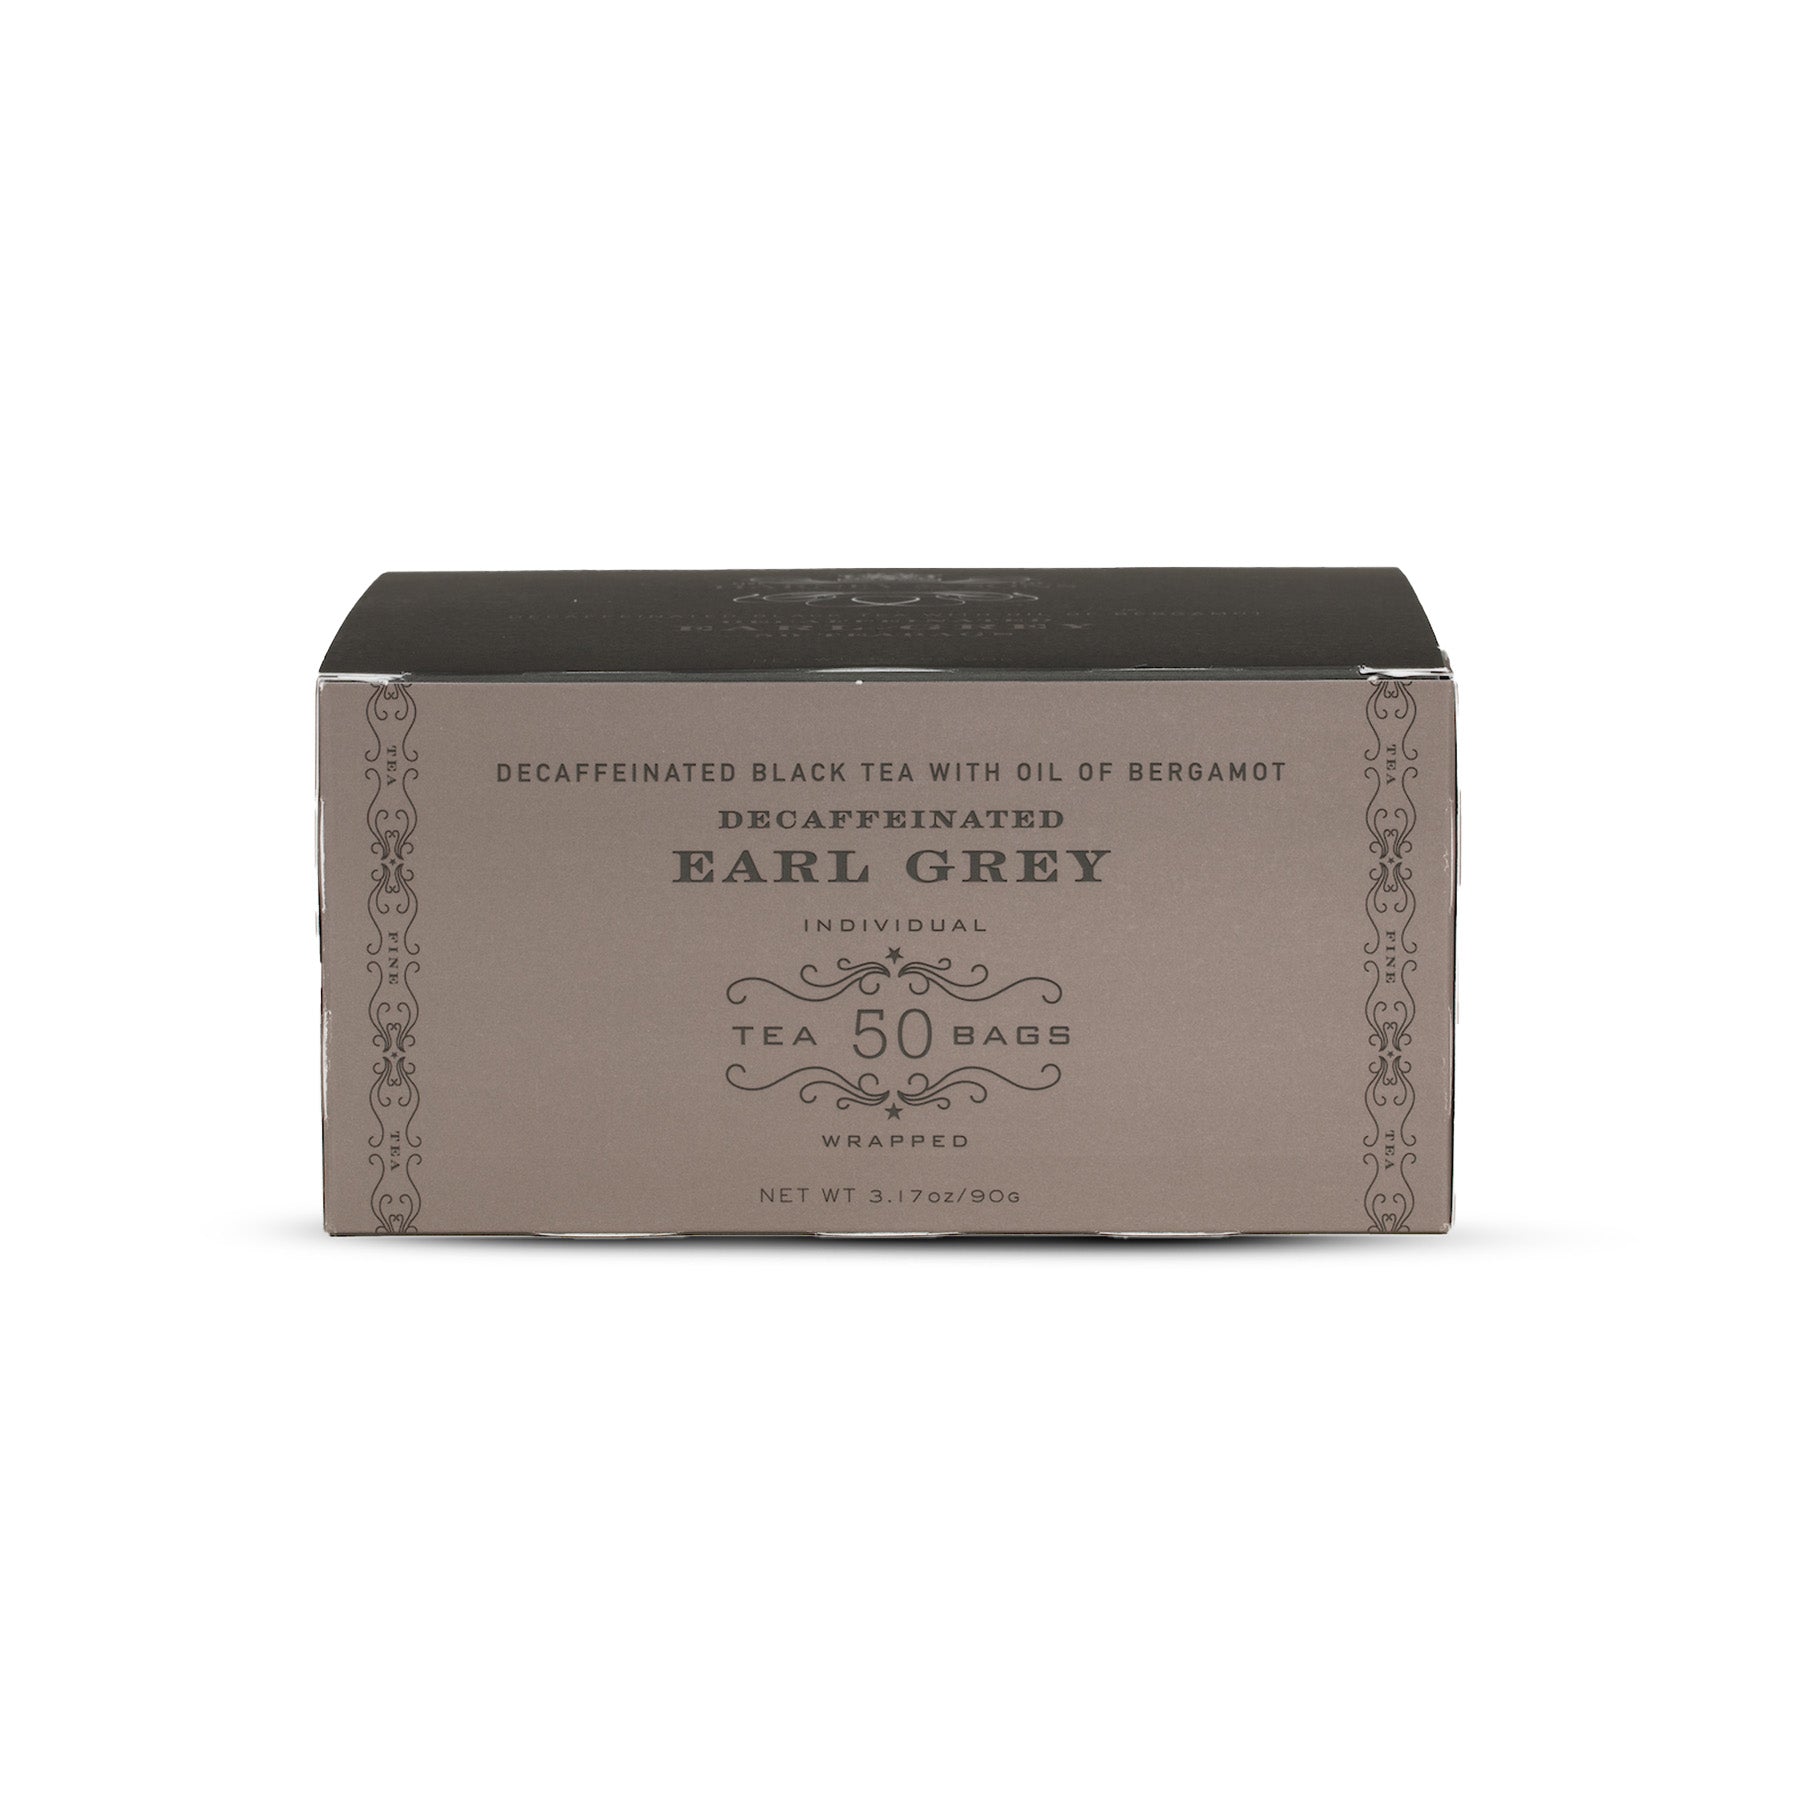 Decaf Earl Grey - Teabags 50 CT Foil Wrapped Teabags - Harney & Sons Fine Teas Europe